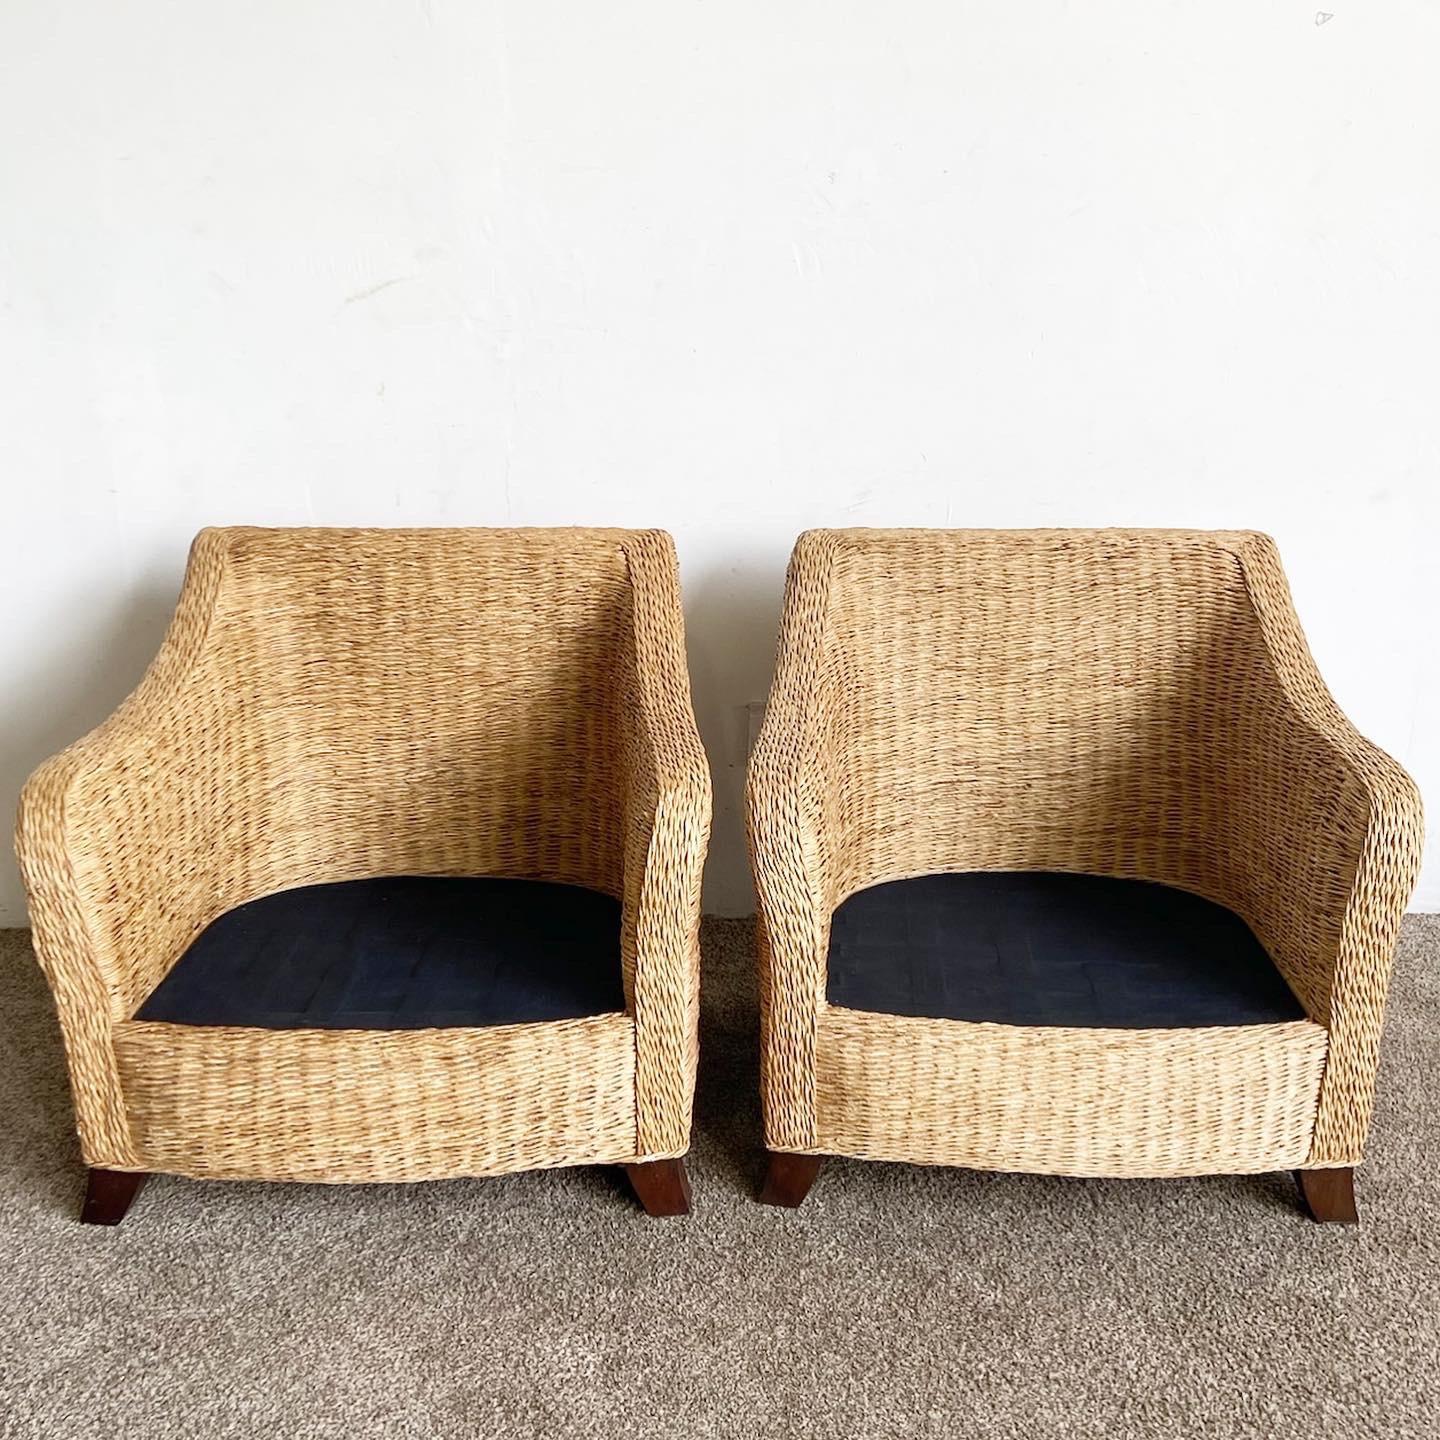 Boho Chic Wicker Arm Chairs With Brown Cushions For Sale 1